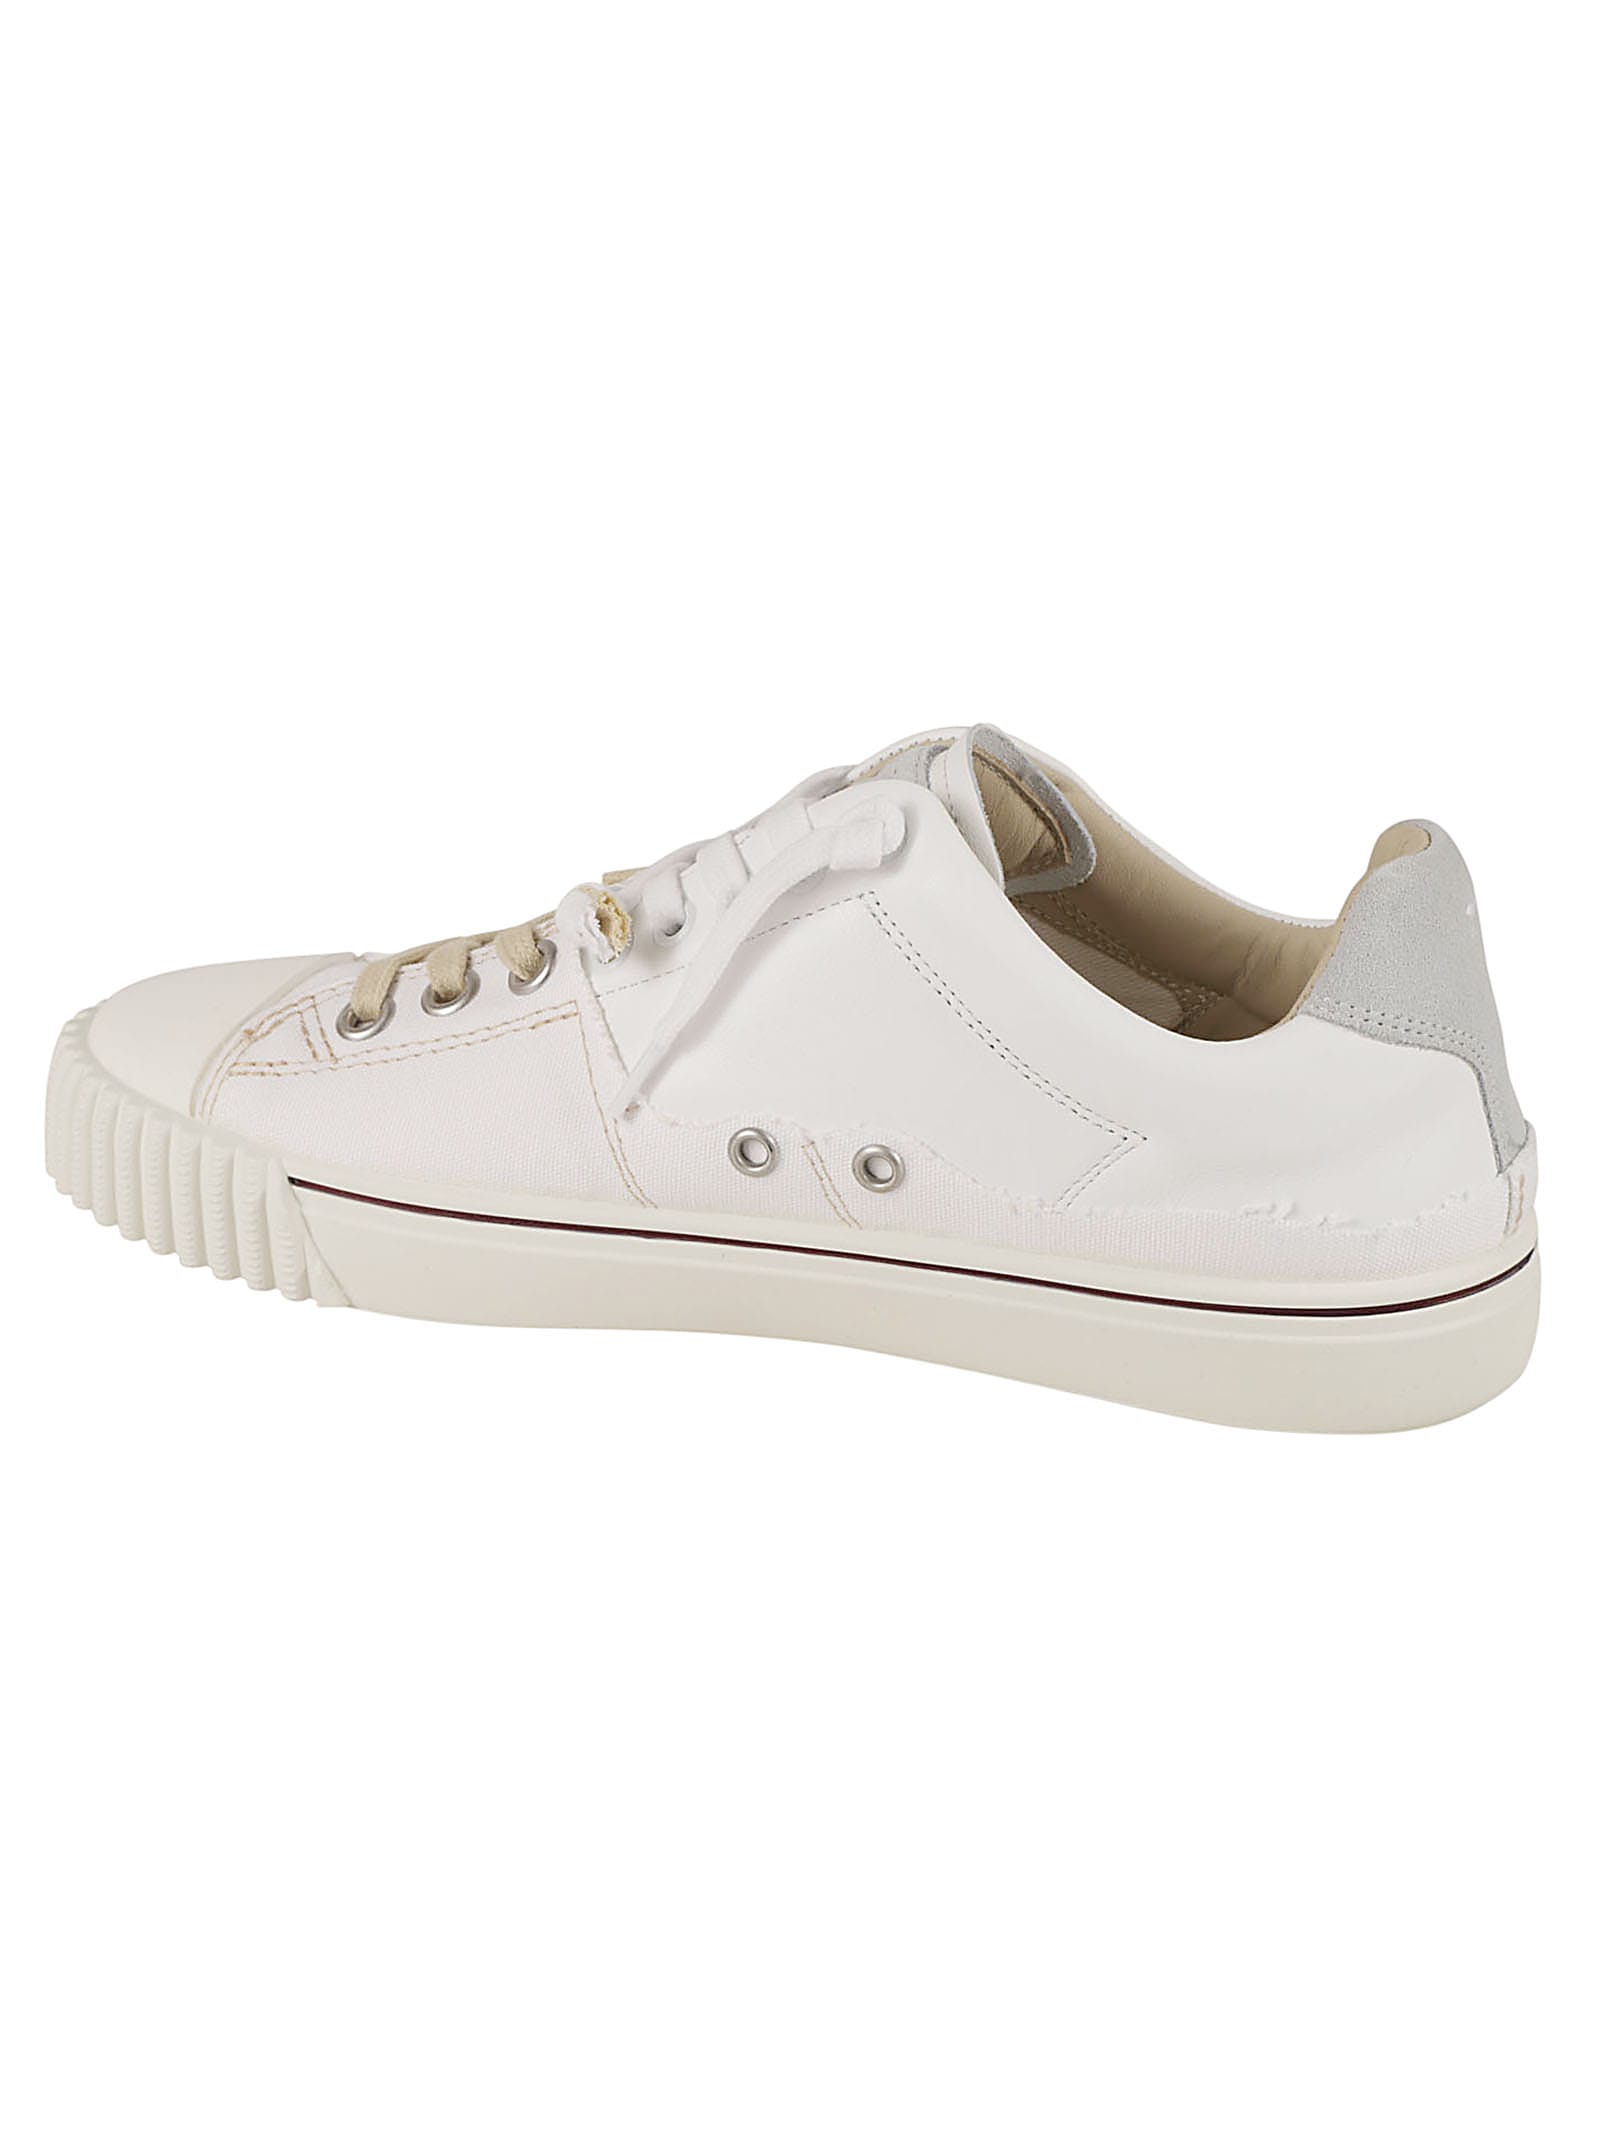 Shop Maison Margiela Evolution Low Sneakers In Off-white